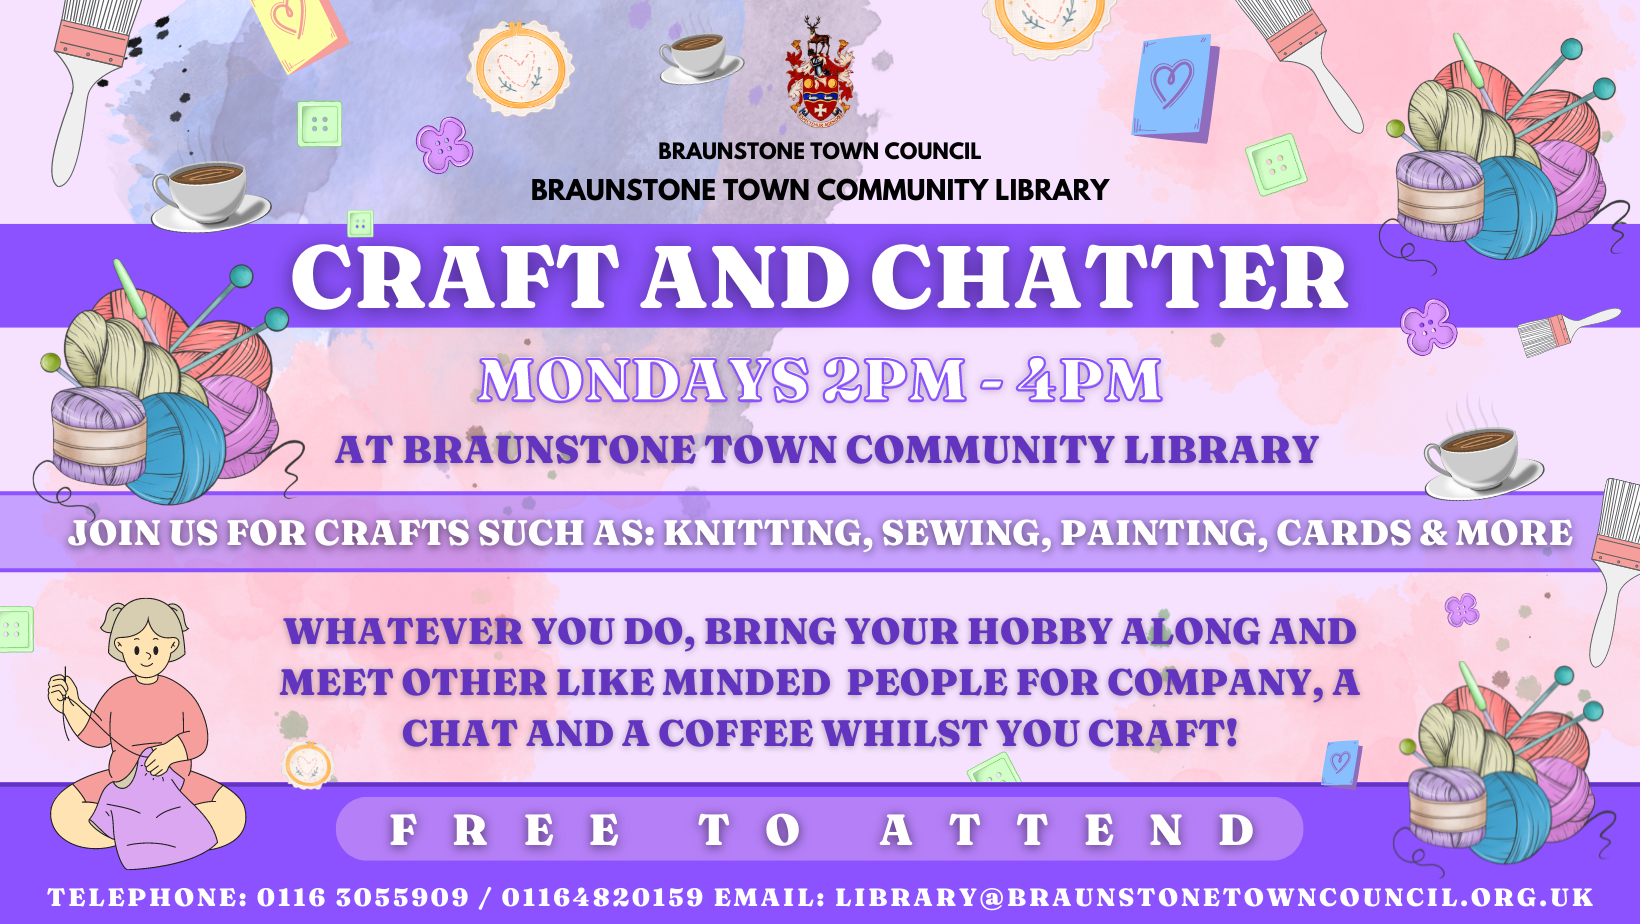 Craft & Chatter at Braunstone Town Community Library